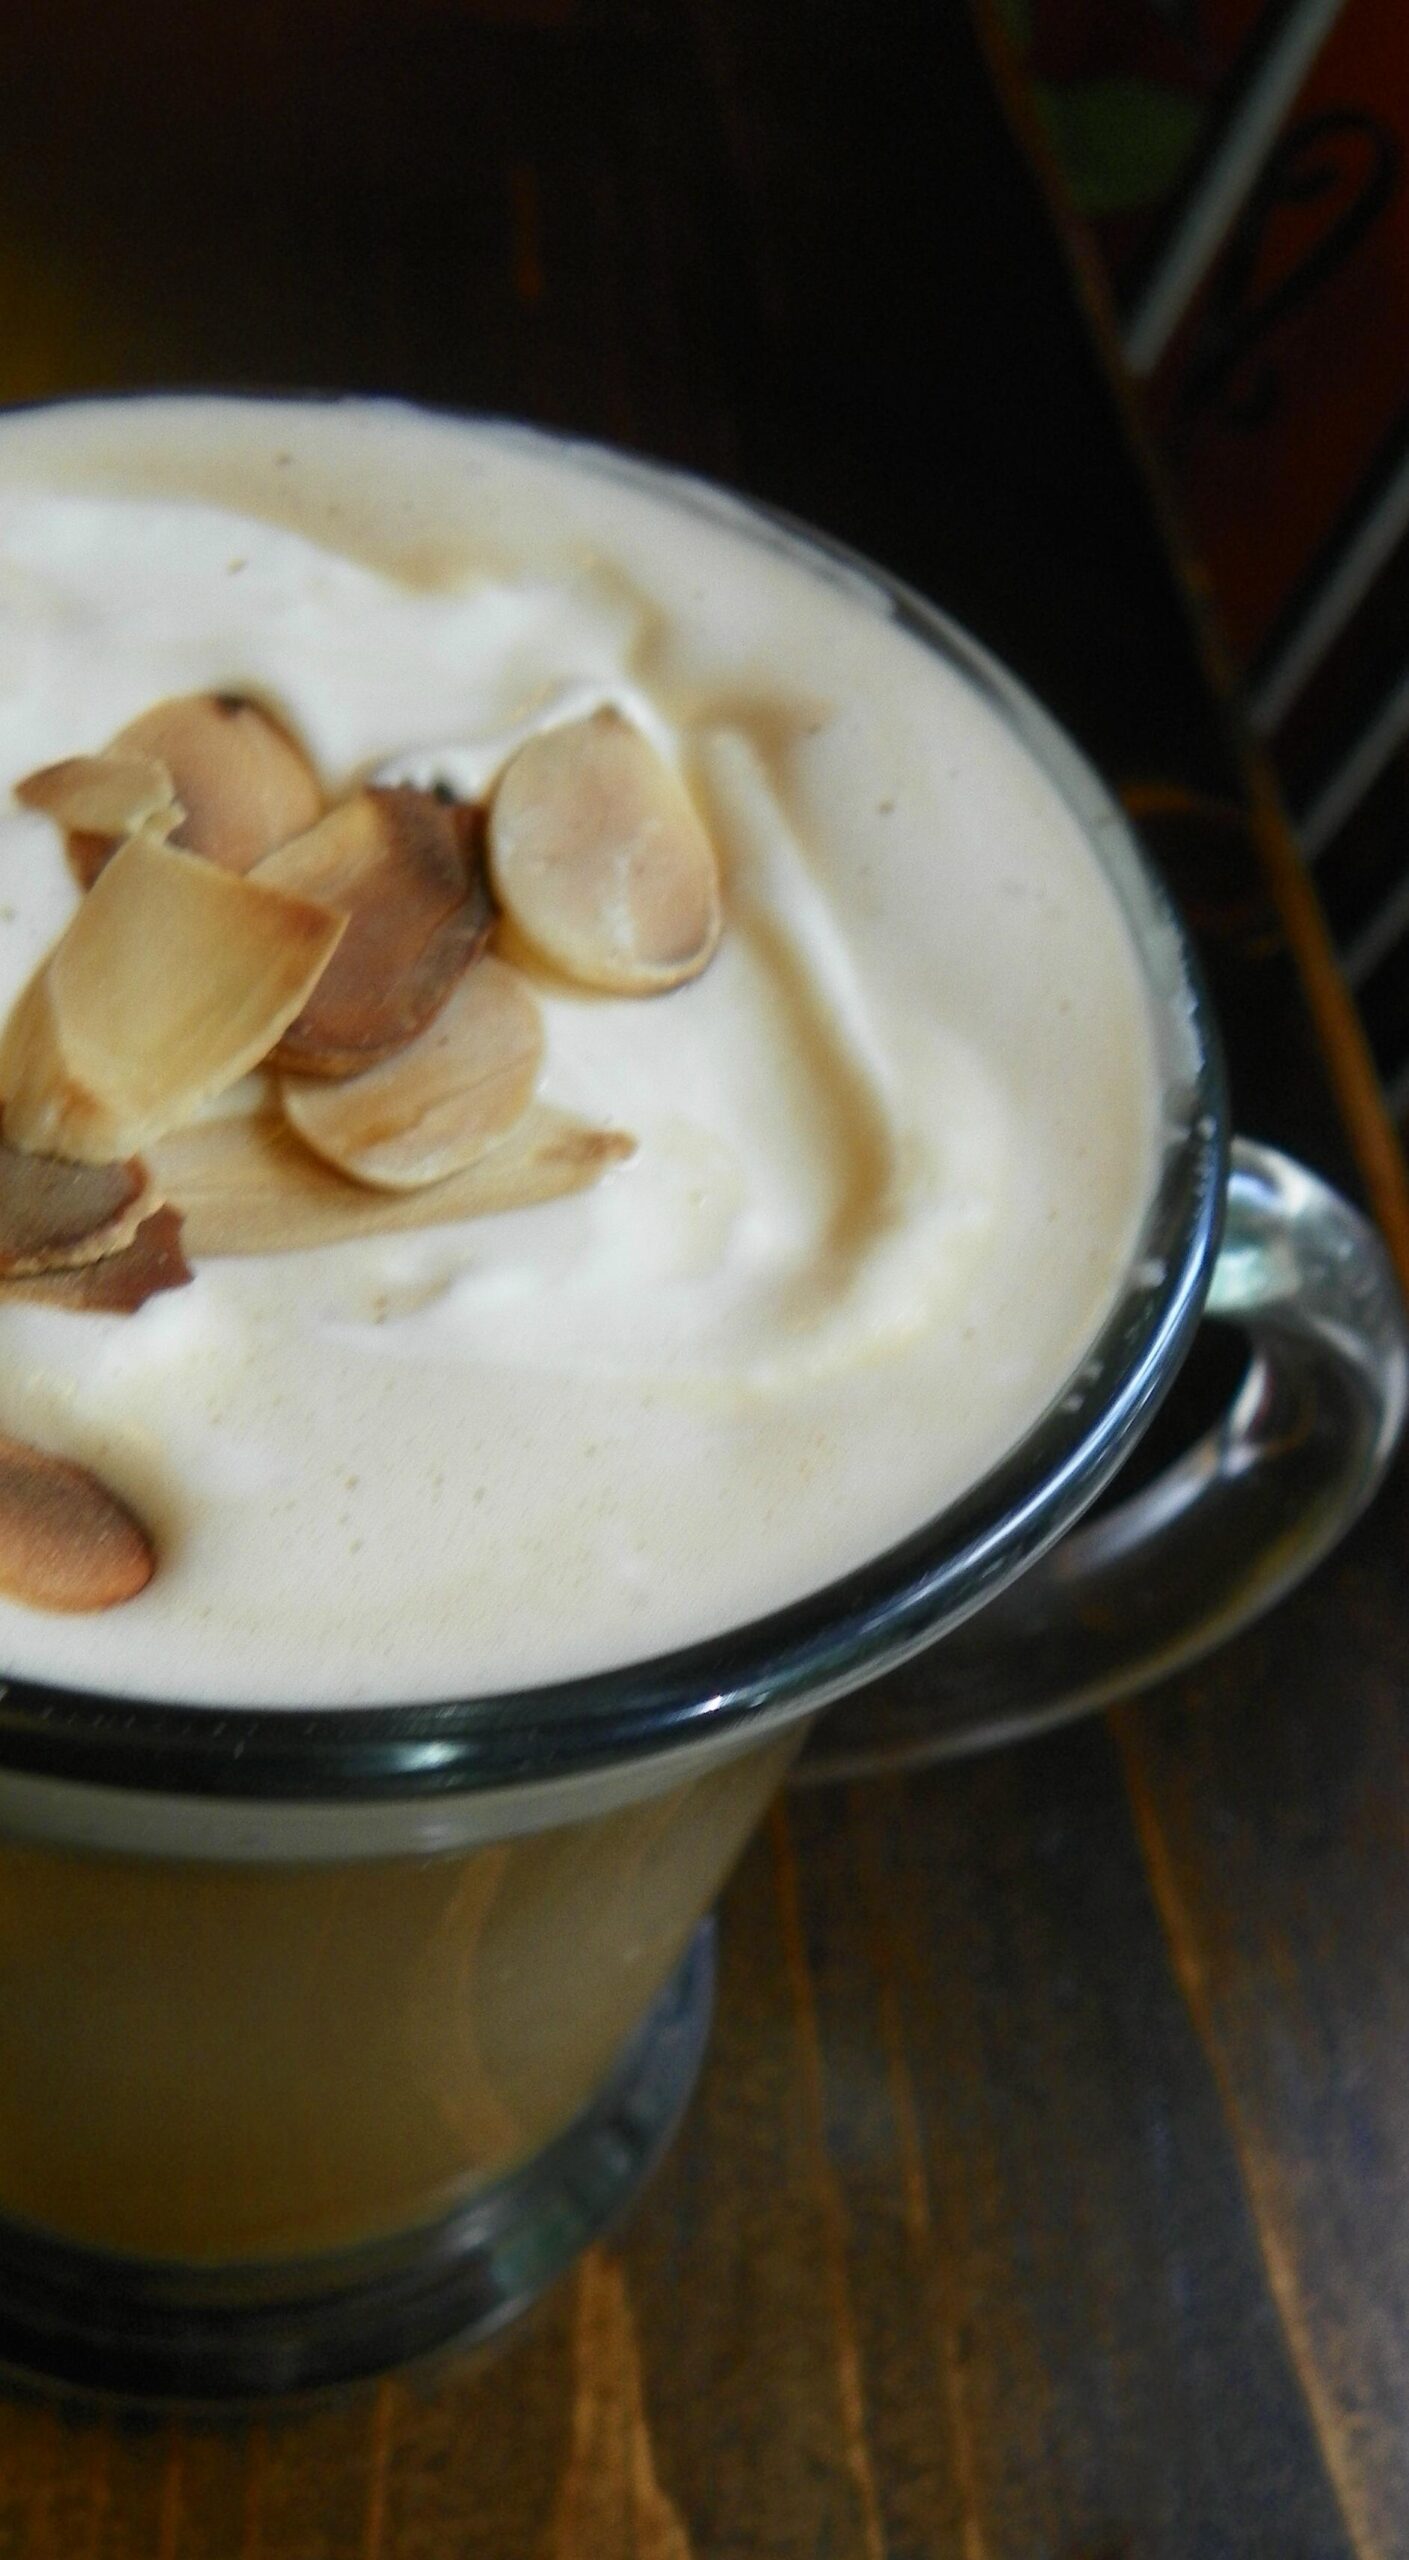  Indulge in a heavenly experience with our Creamy Chocolate Almond Coffee.